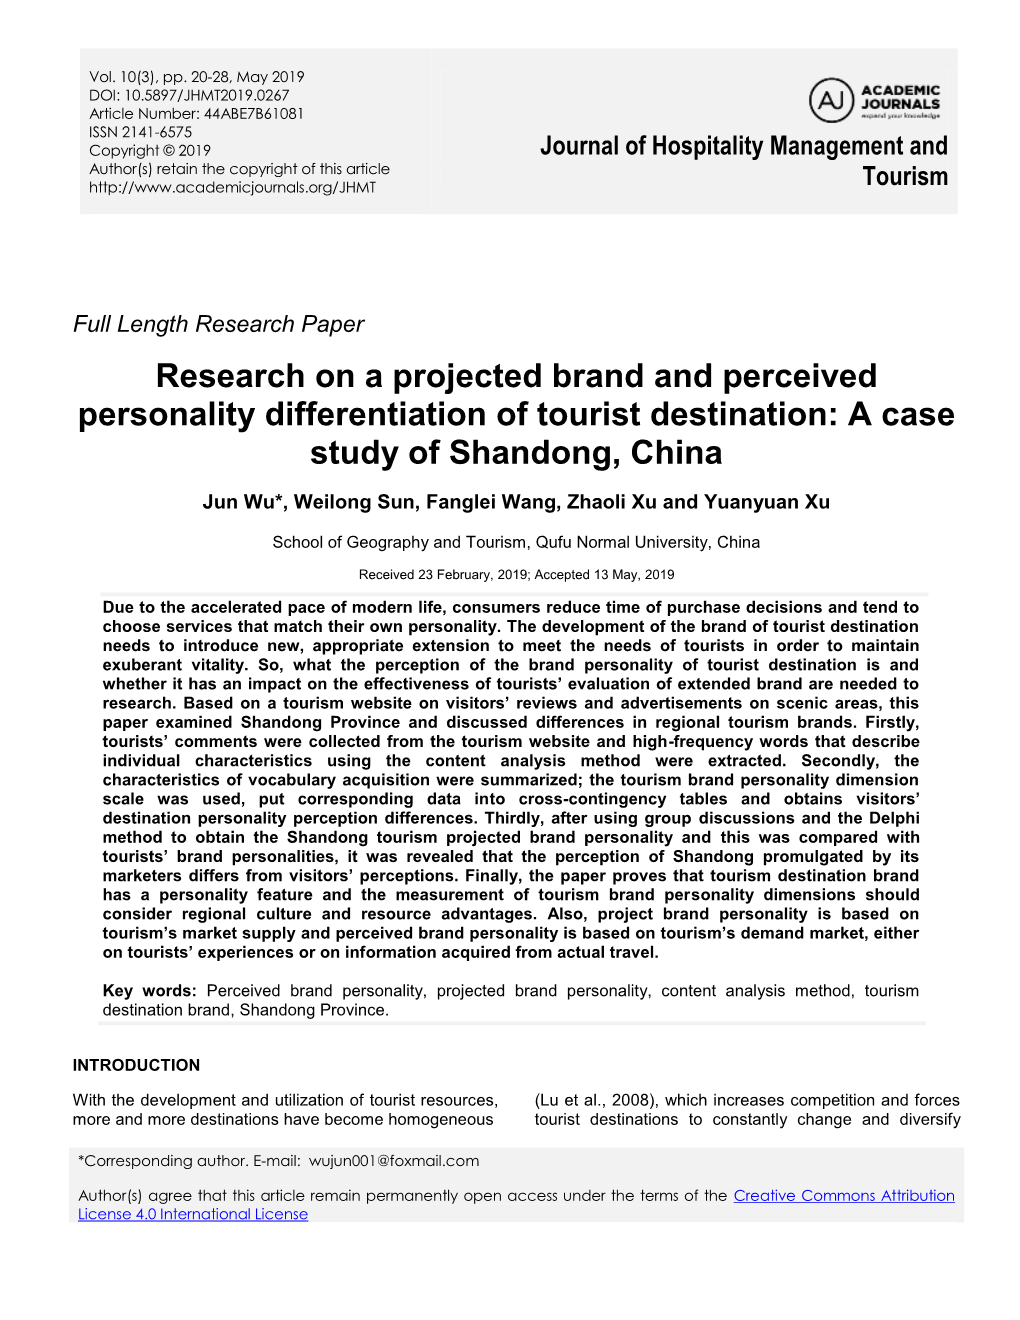 Research on a Projected Brand and Perceived Personality Differentiation of Tourist Destination: a Case Study of Shandong, China